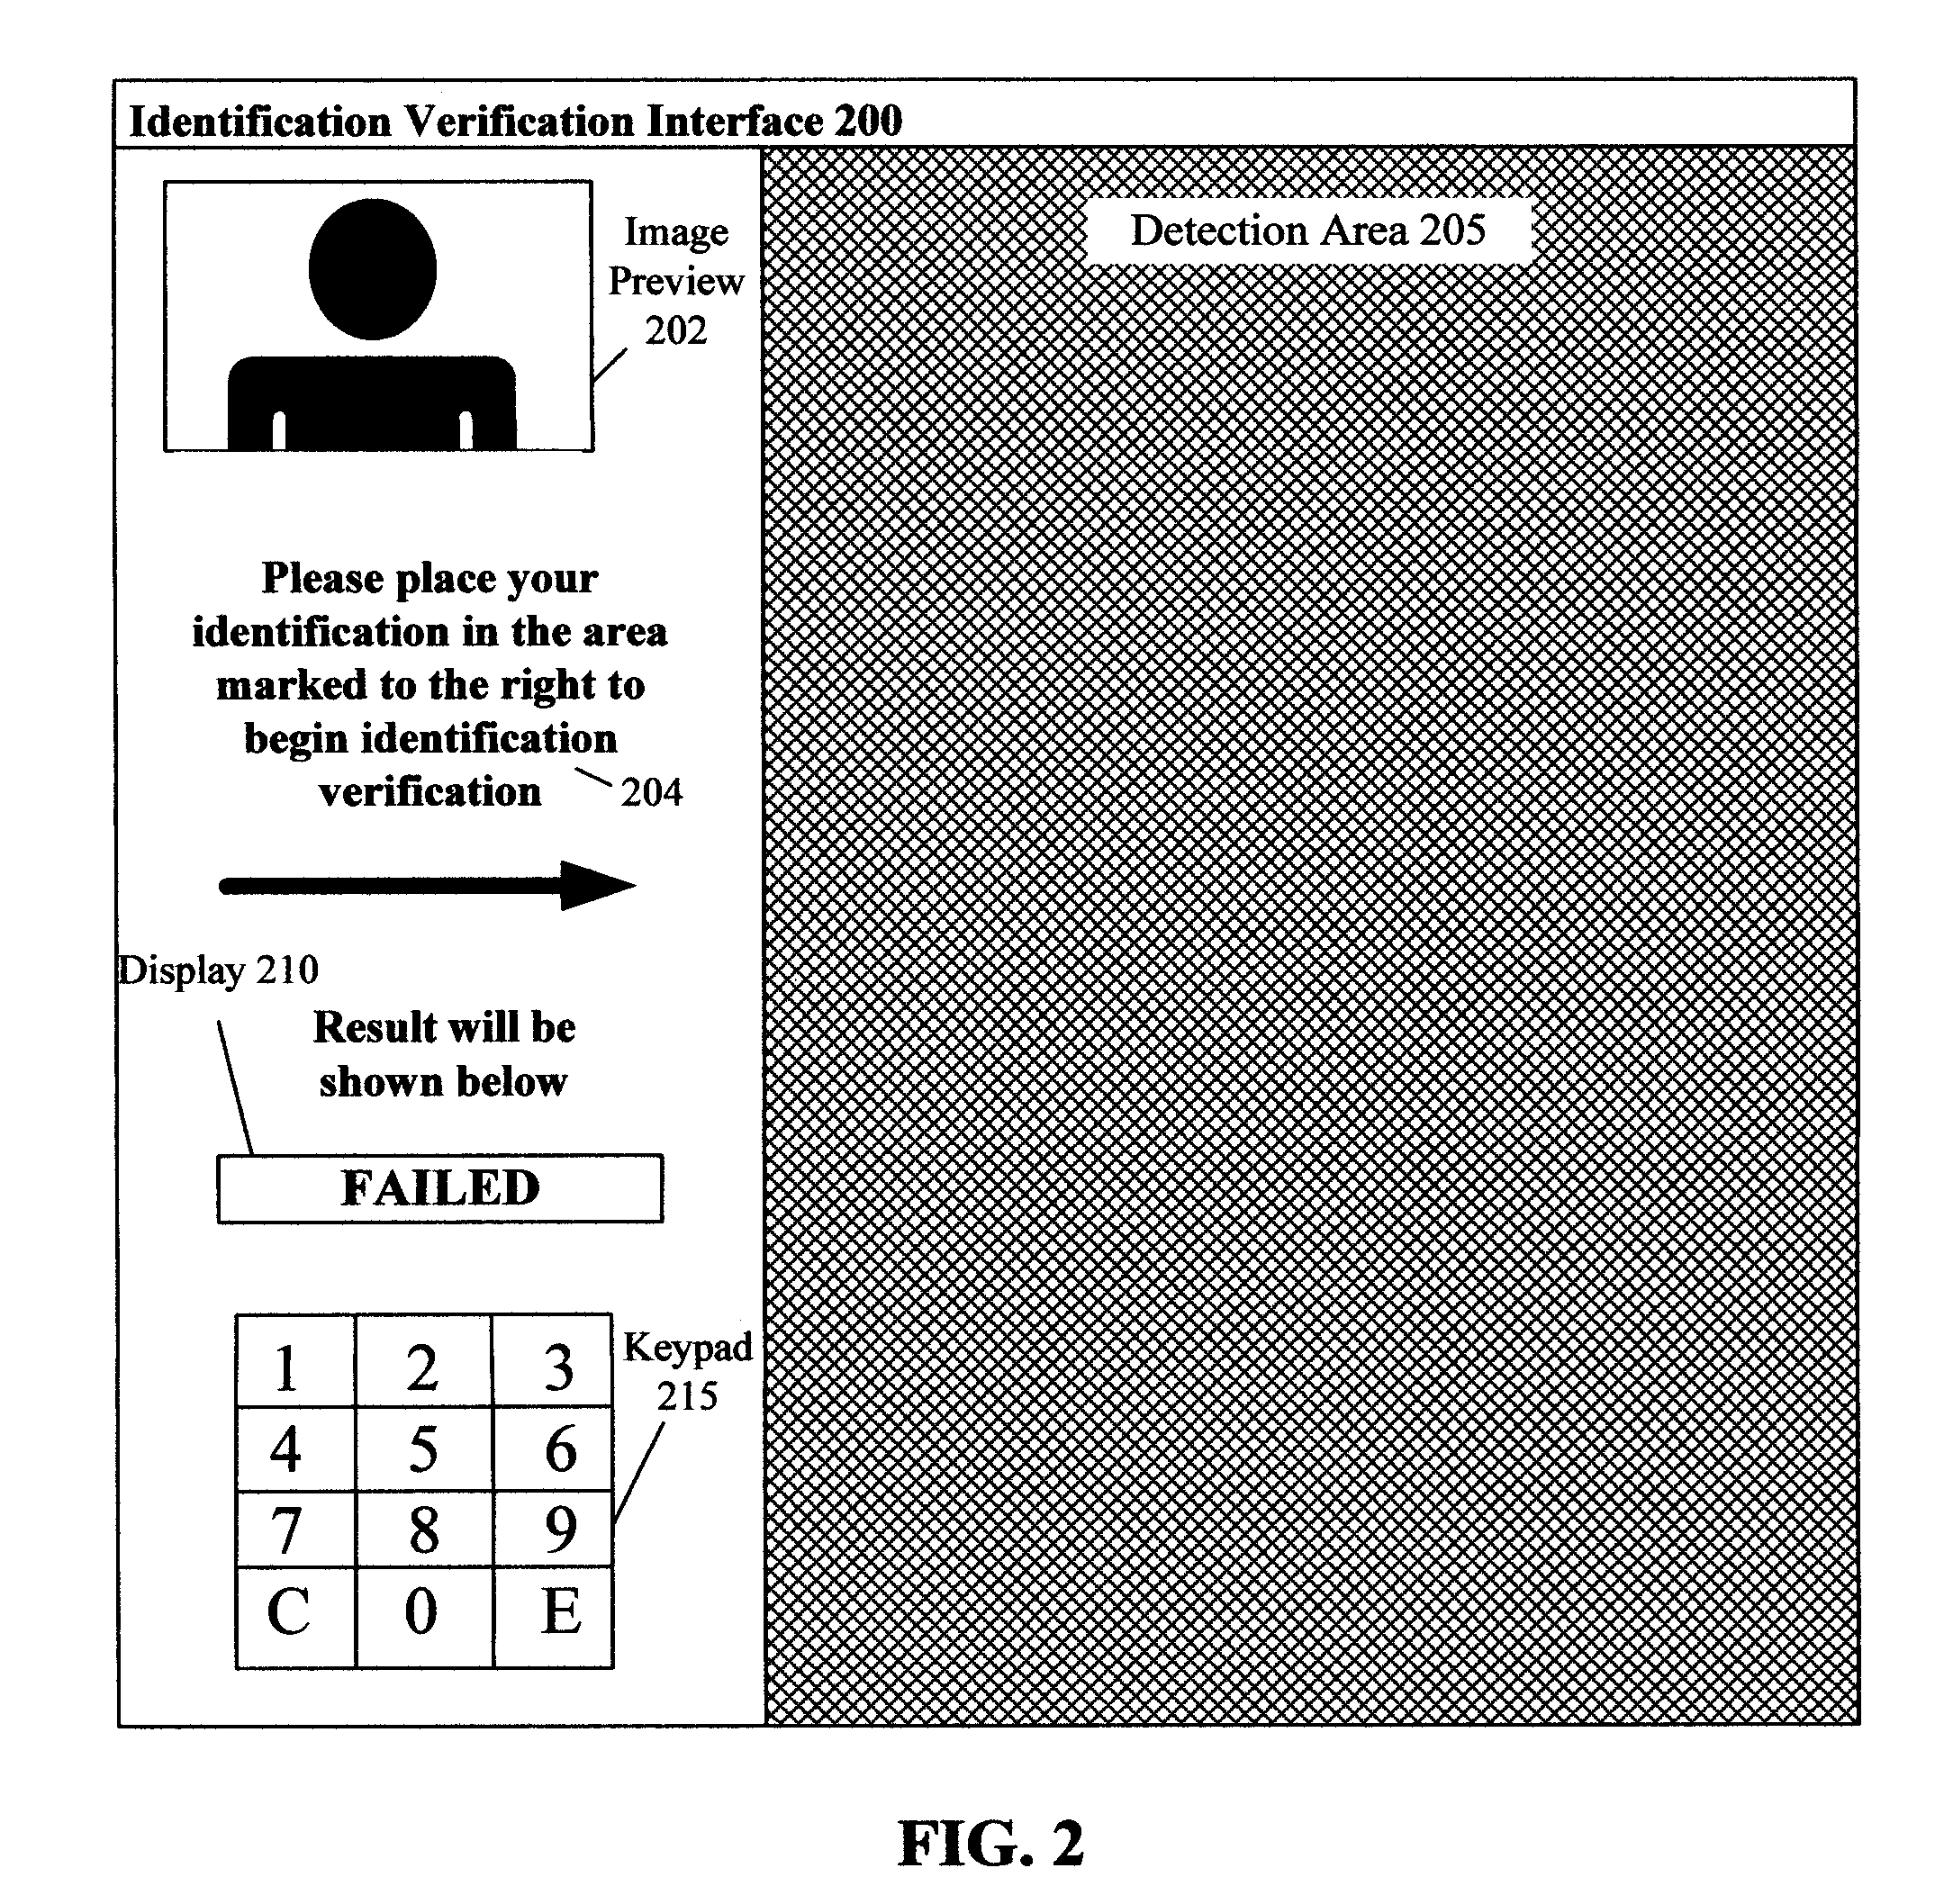 Using a surface based computing device for verification of an identification document